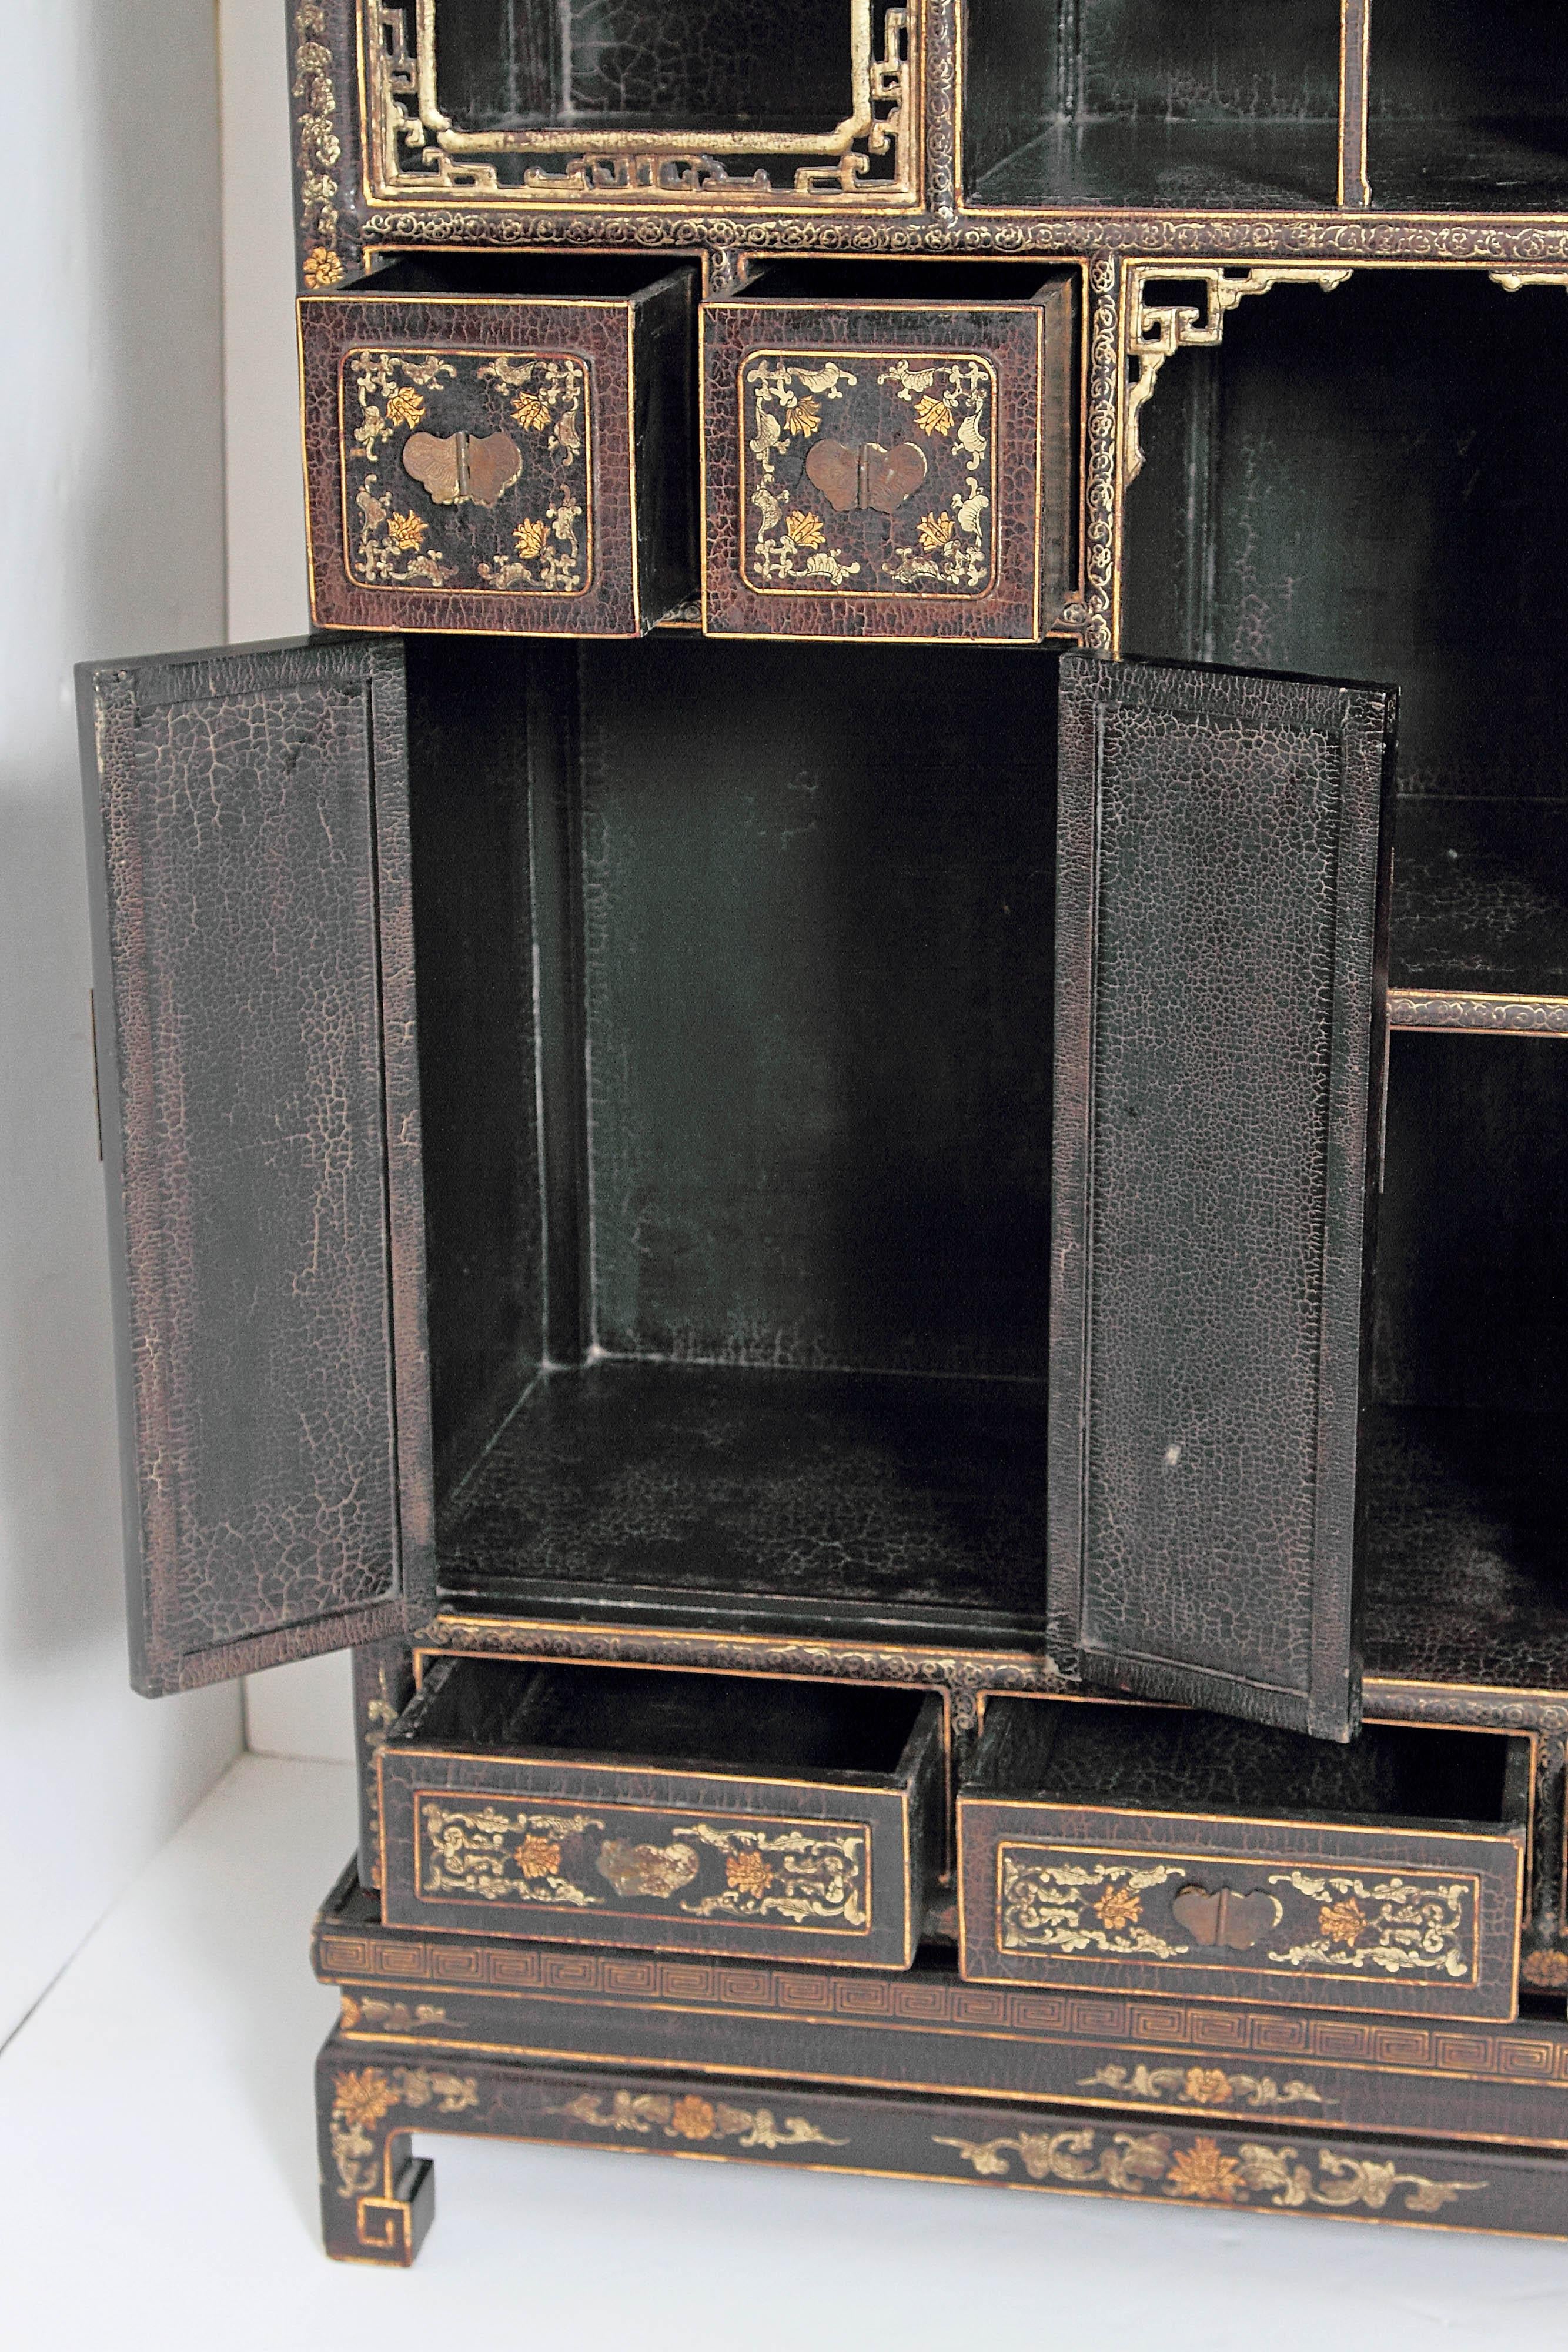 Pair of Chinese Black Lacquer Display Cabinets (20. Jahrhundert)